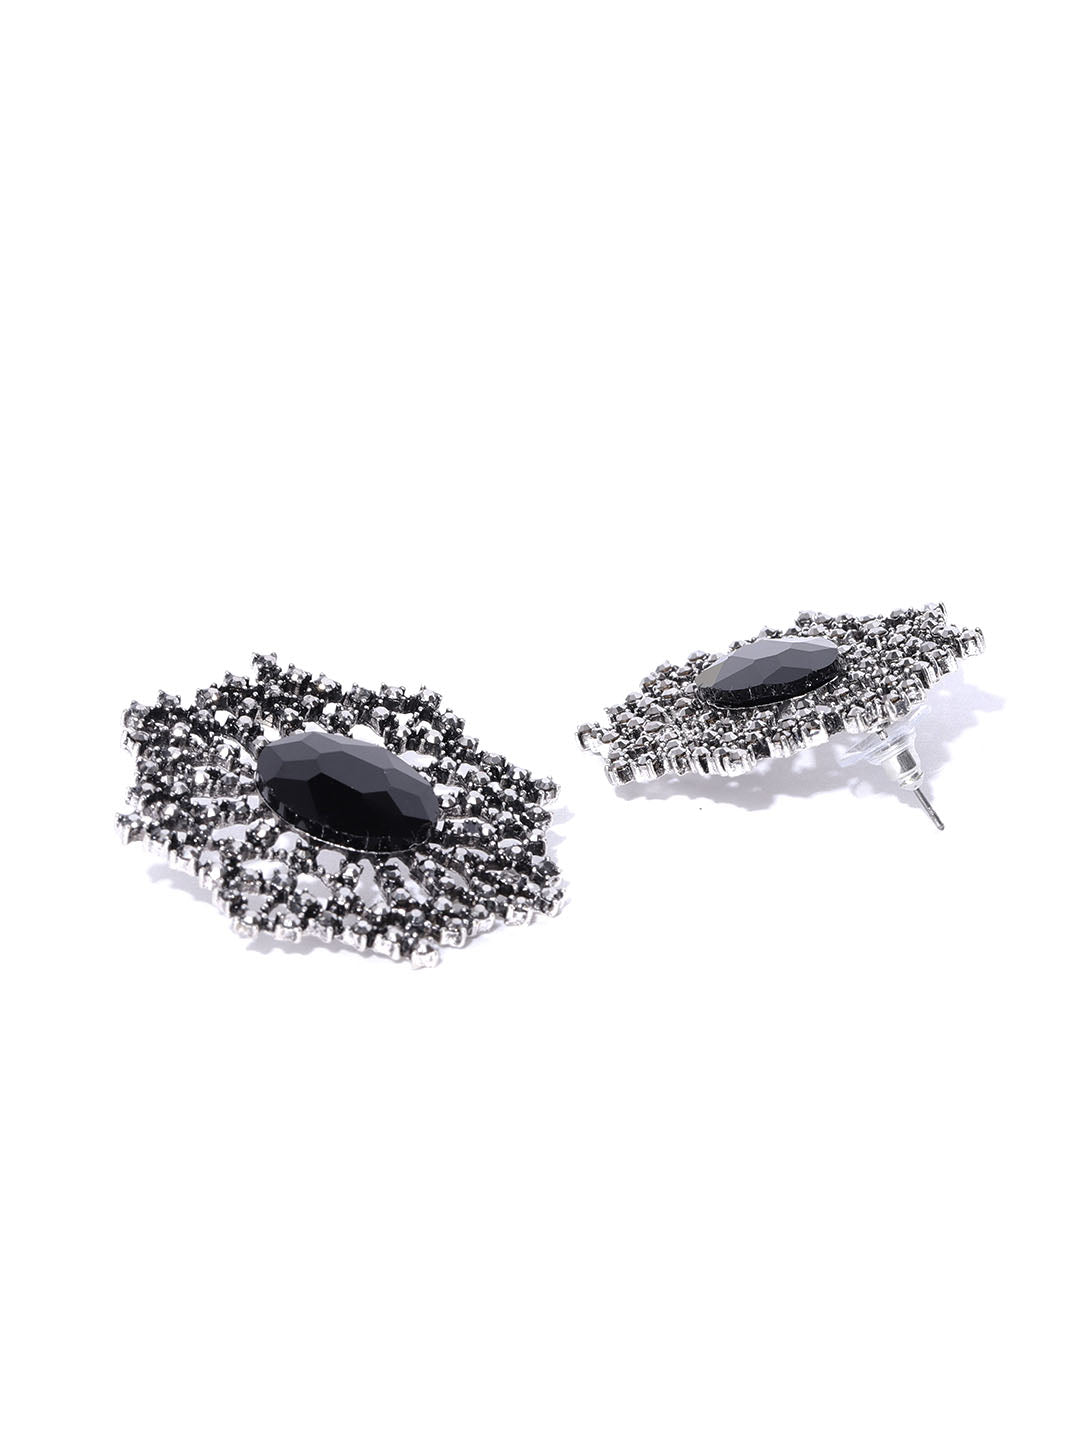 Floral Pattern Black Stone Studded Handcrafted Drop Earrings